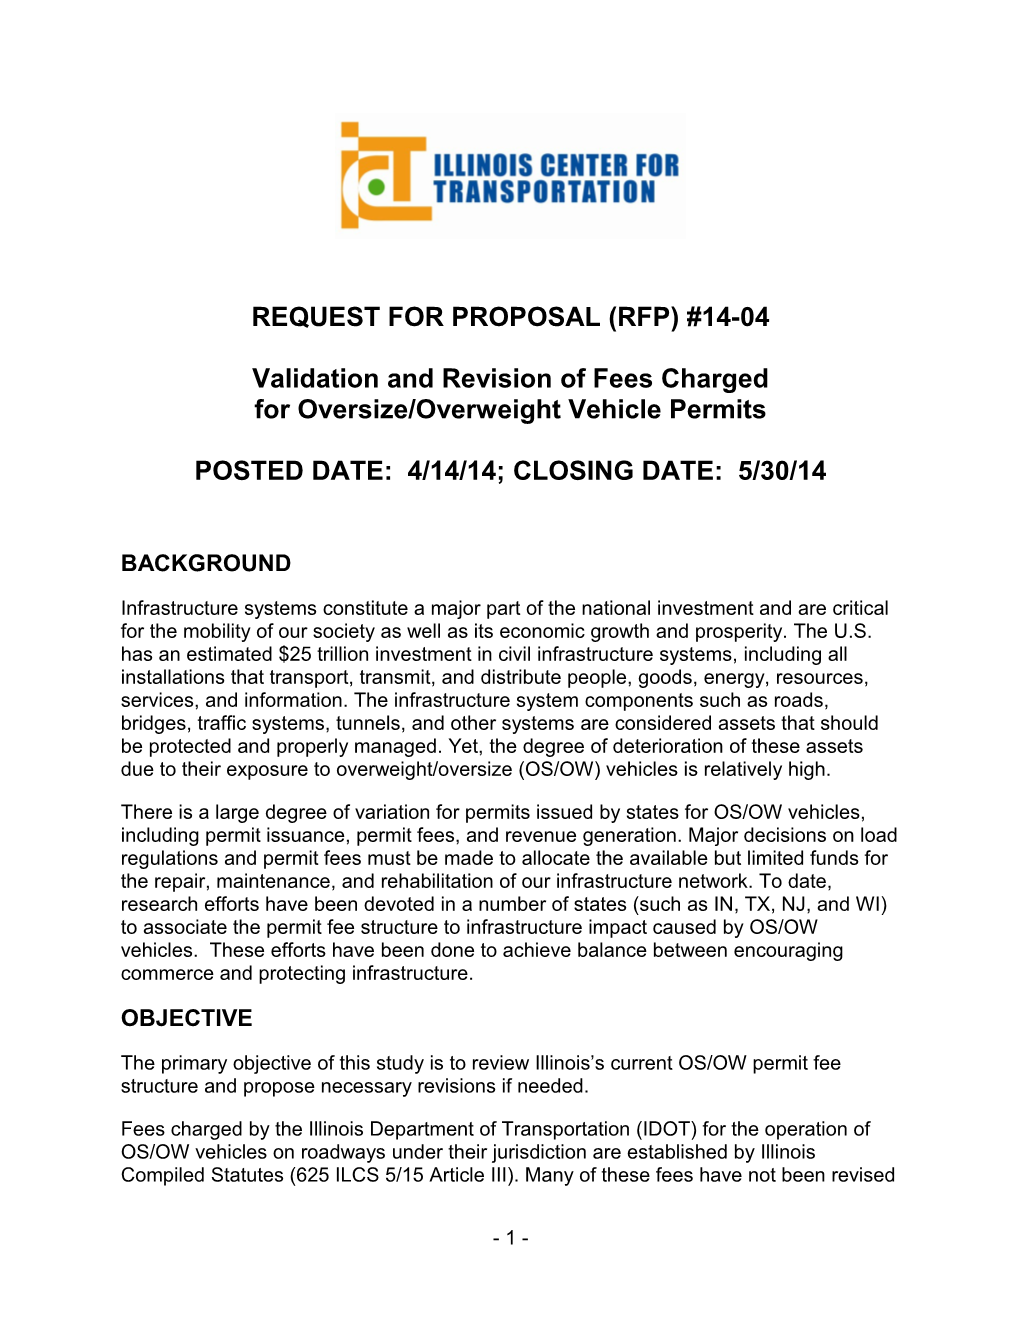 Request for Proposal (Rfp) #14-04